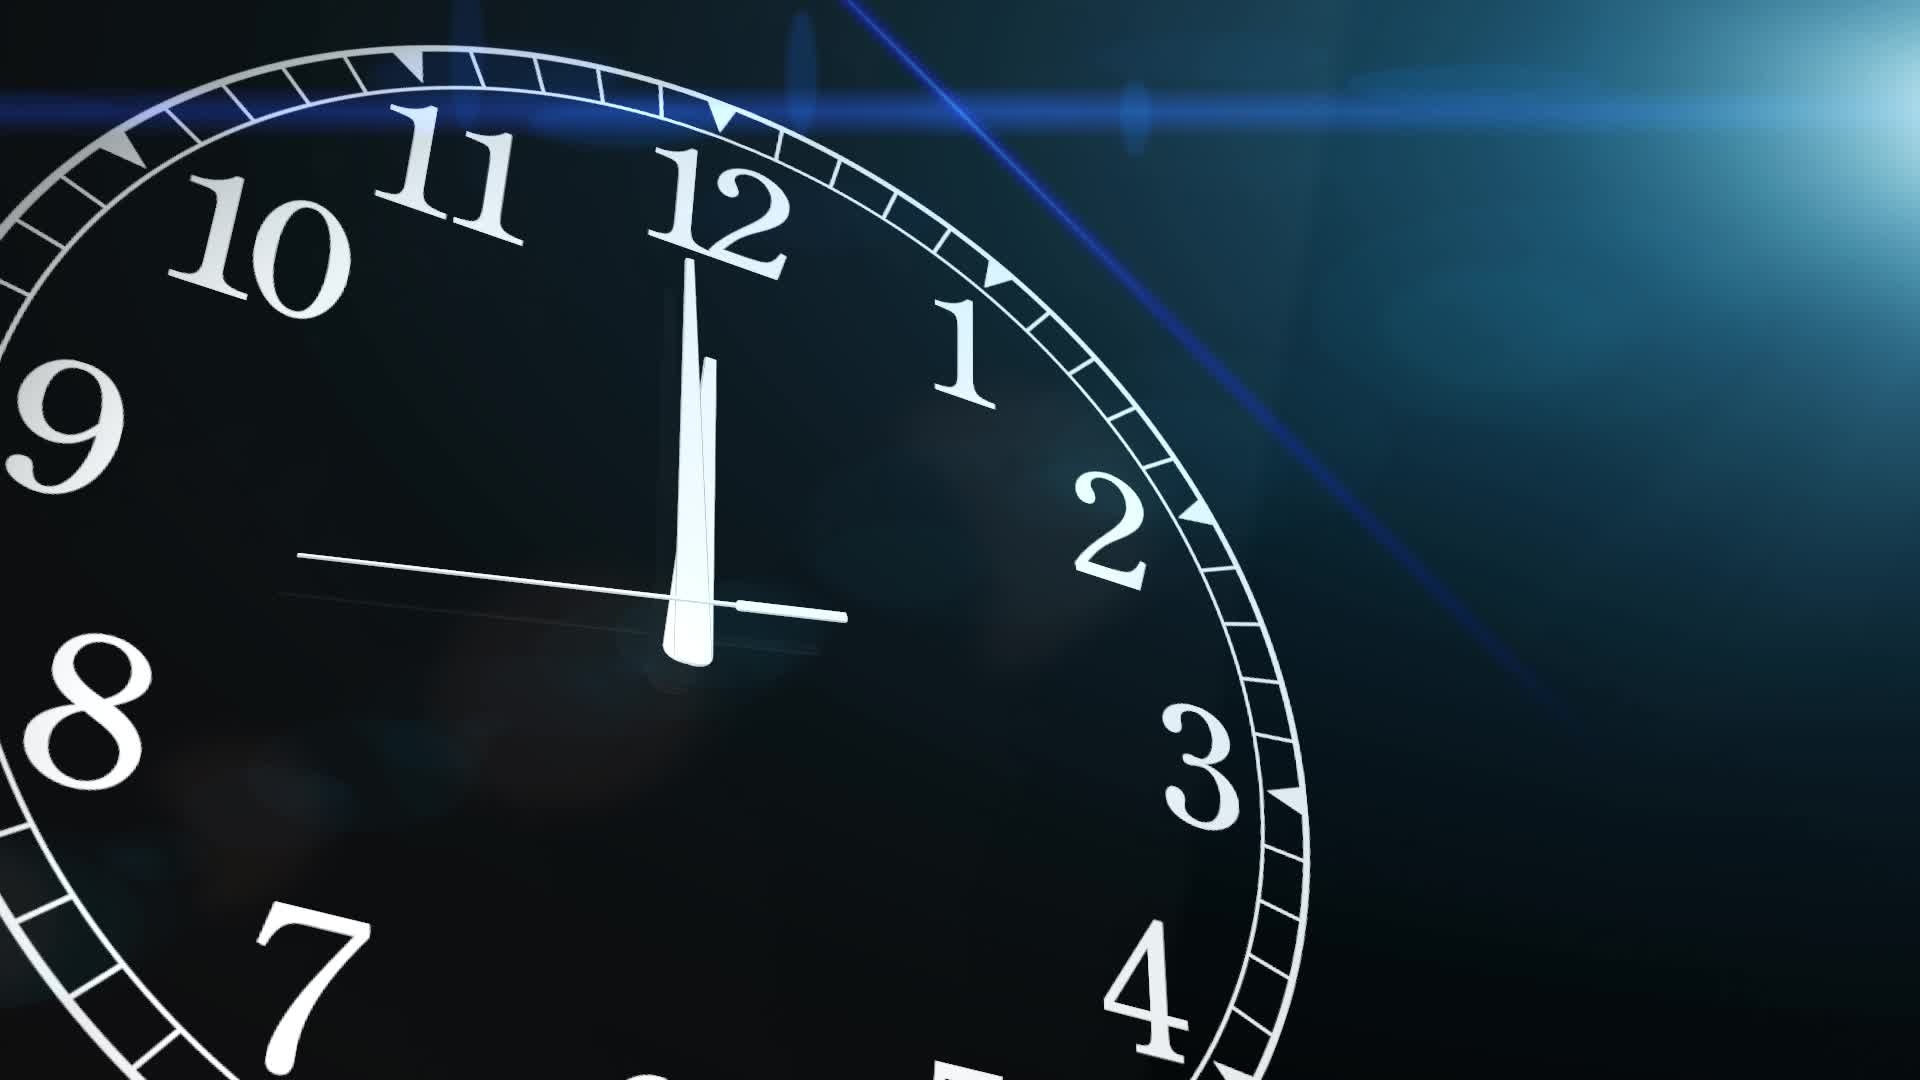 Clock ticking, Time passing, Time measurement, Auditory experience, 1920x1080 Full HD Desktop